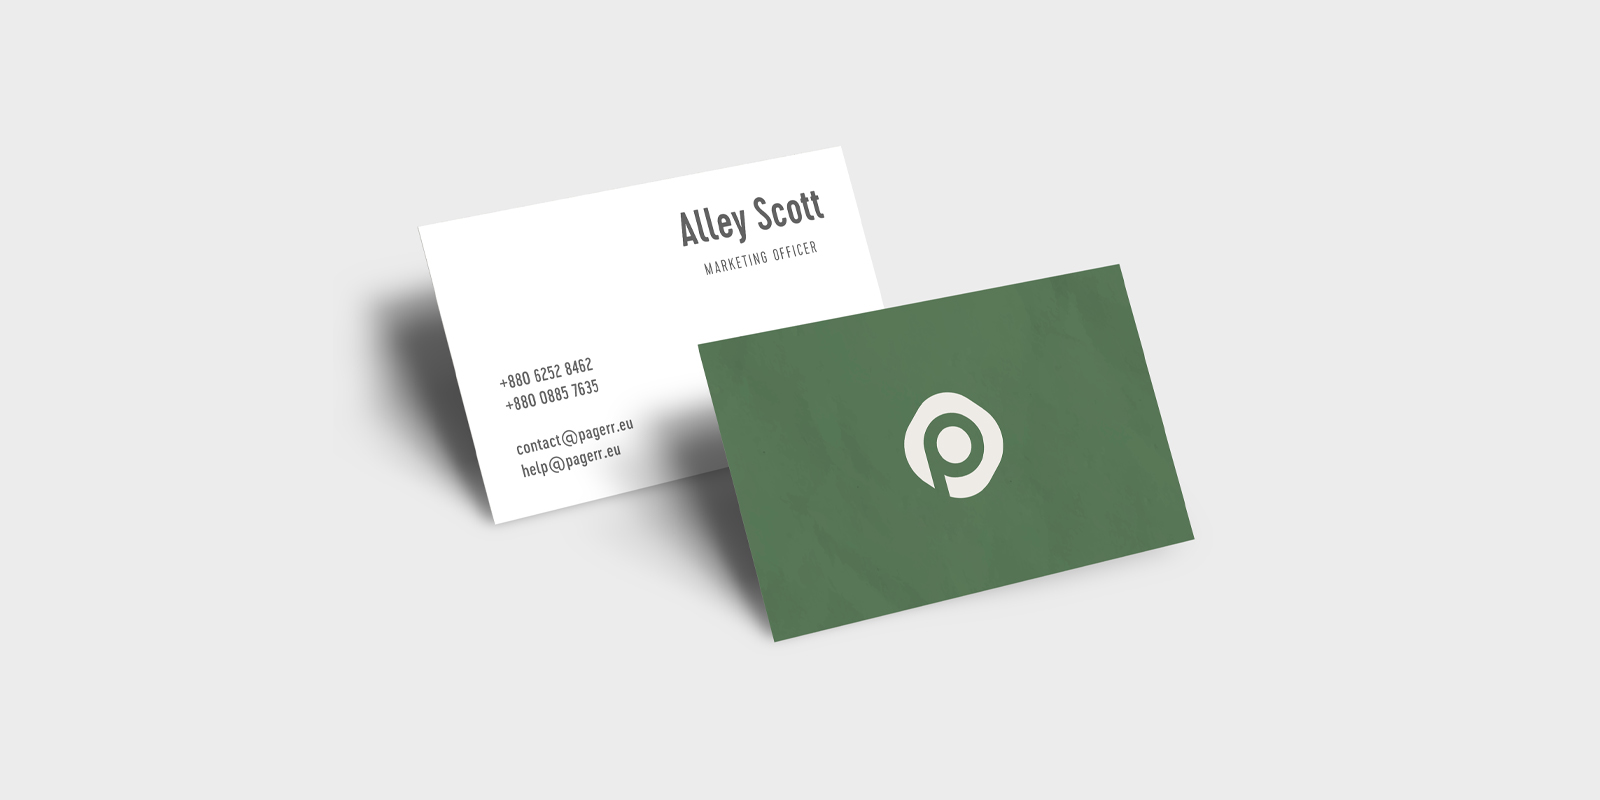 Simple business cards in Barcelona - Print with Pagerr